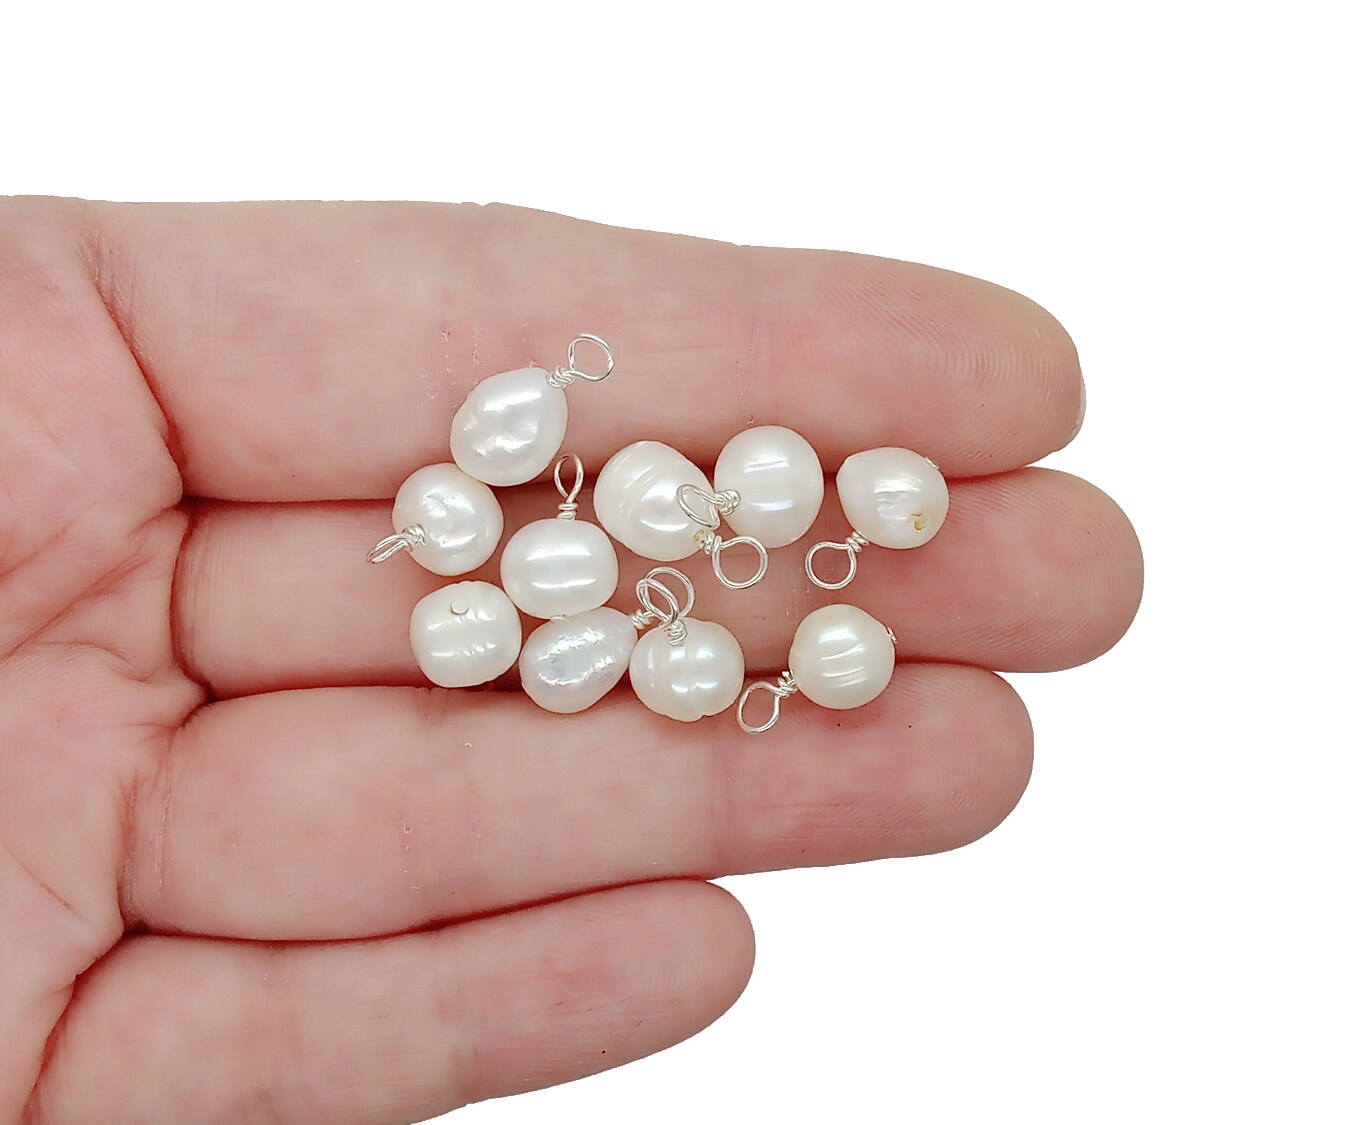 Natural Pearl Charms - 10 pieces